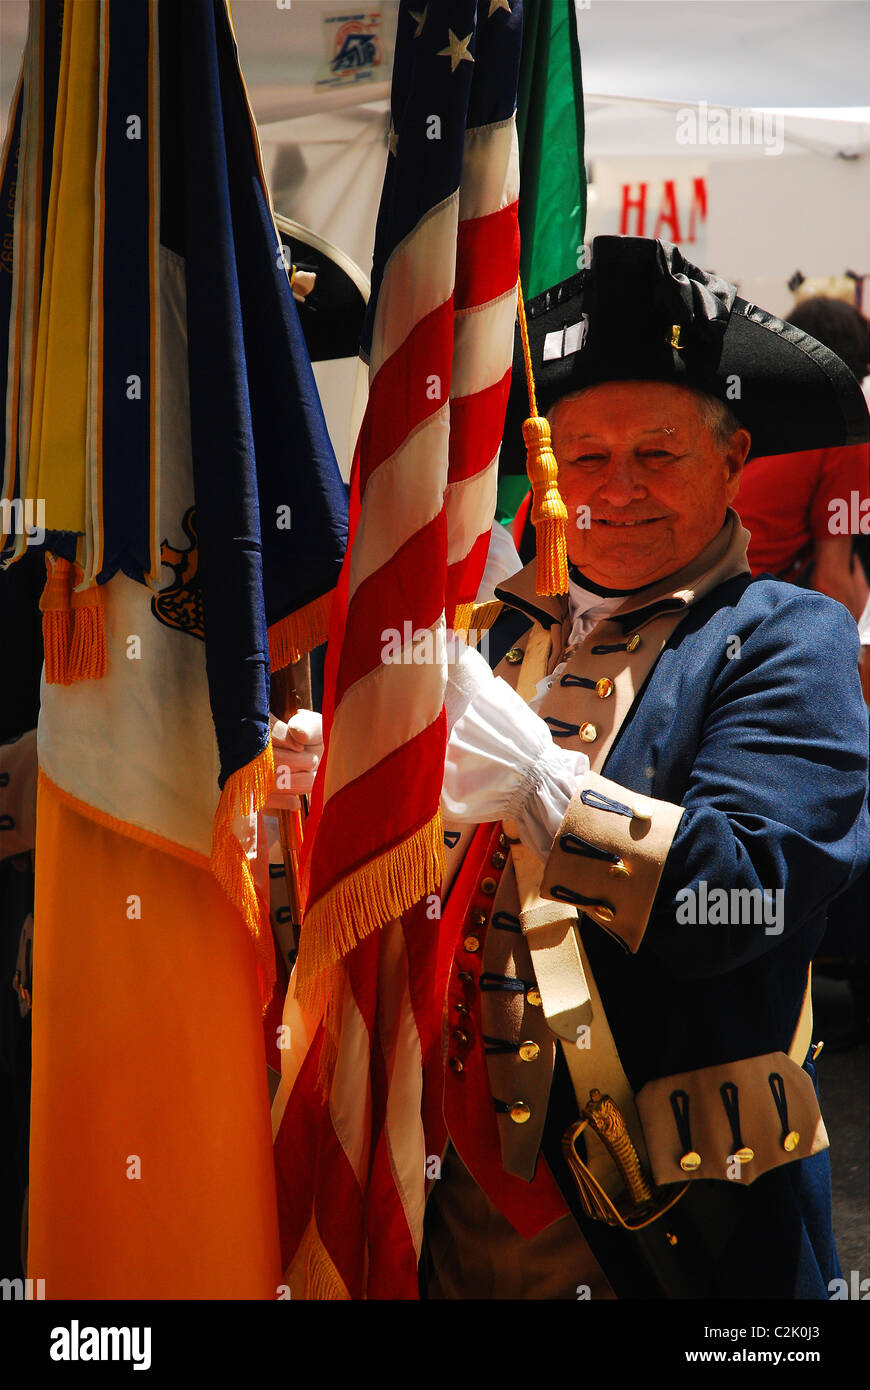 A colonial reenactor carries the flags in the Flag Day festivities at the Betsy Ross House, Philadelphia Stock Photo